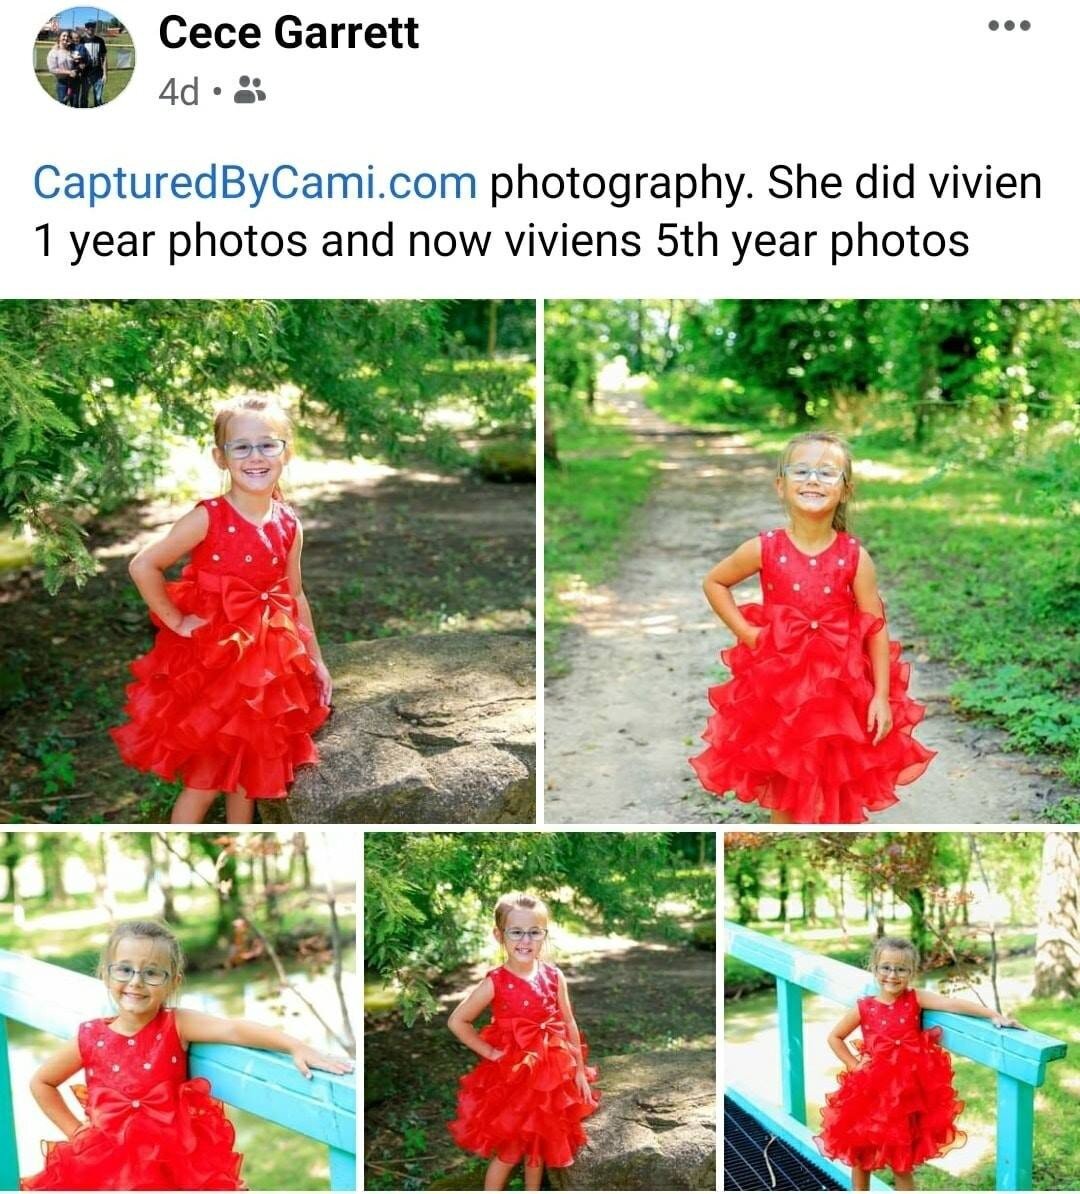 Long time clients. I love building strong relationships with our clients. We appreciate you letting our business capture your memories and grow with your family. ❤❤🧡

Facebook.com/capturedbycami 
CapturedbyCami.com